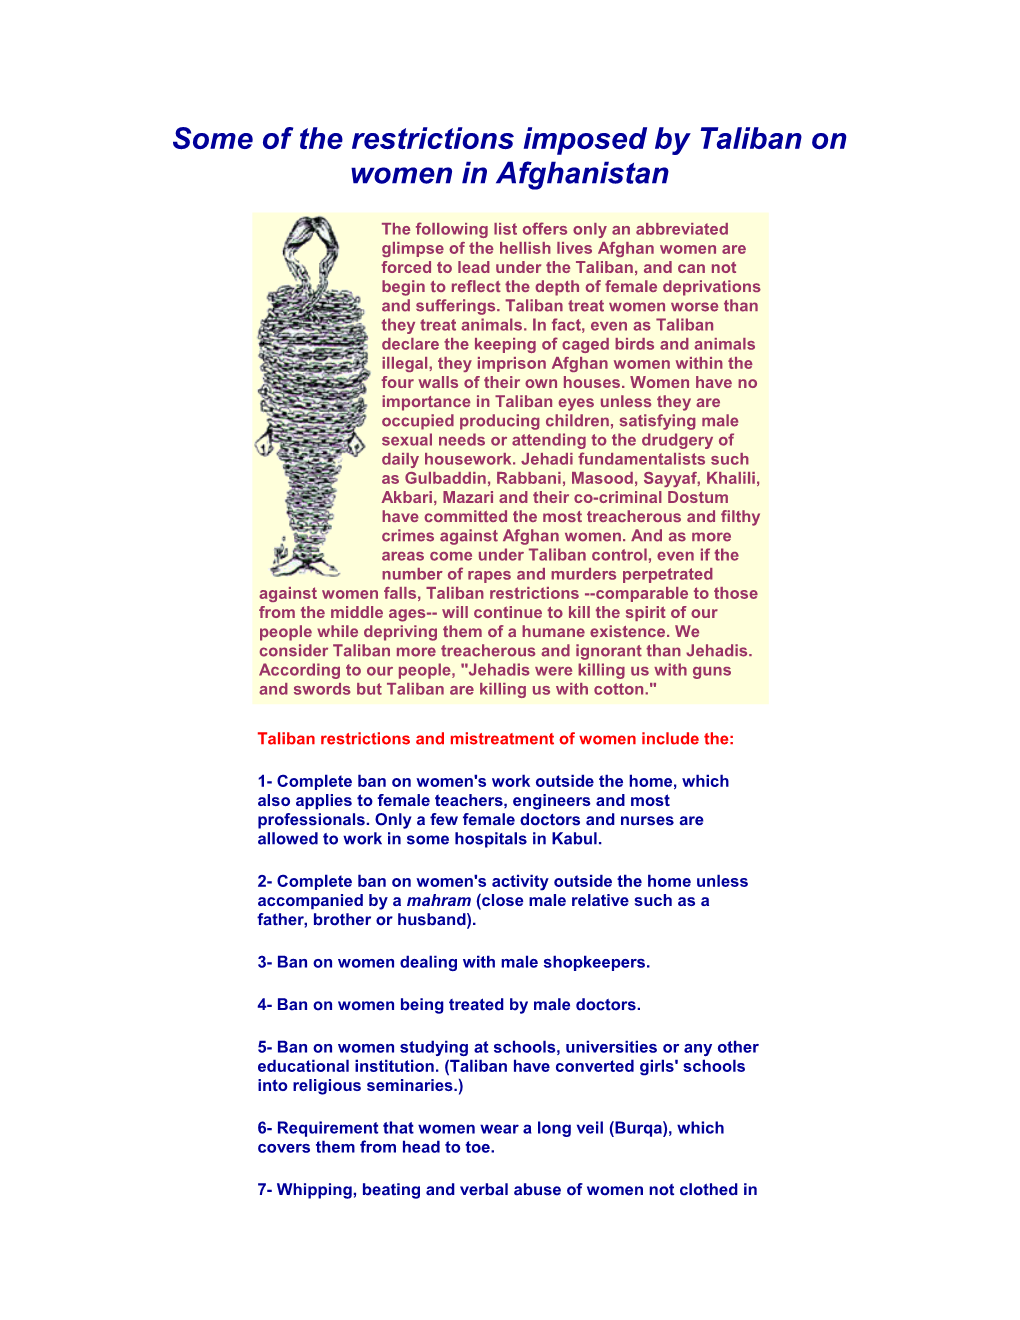 Some of the Restrictions Imposed by Taliban on Women in Afghanistan